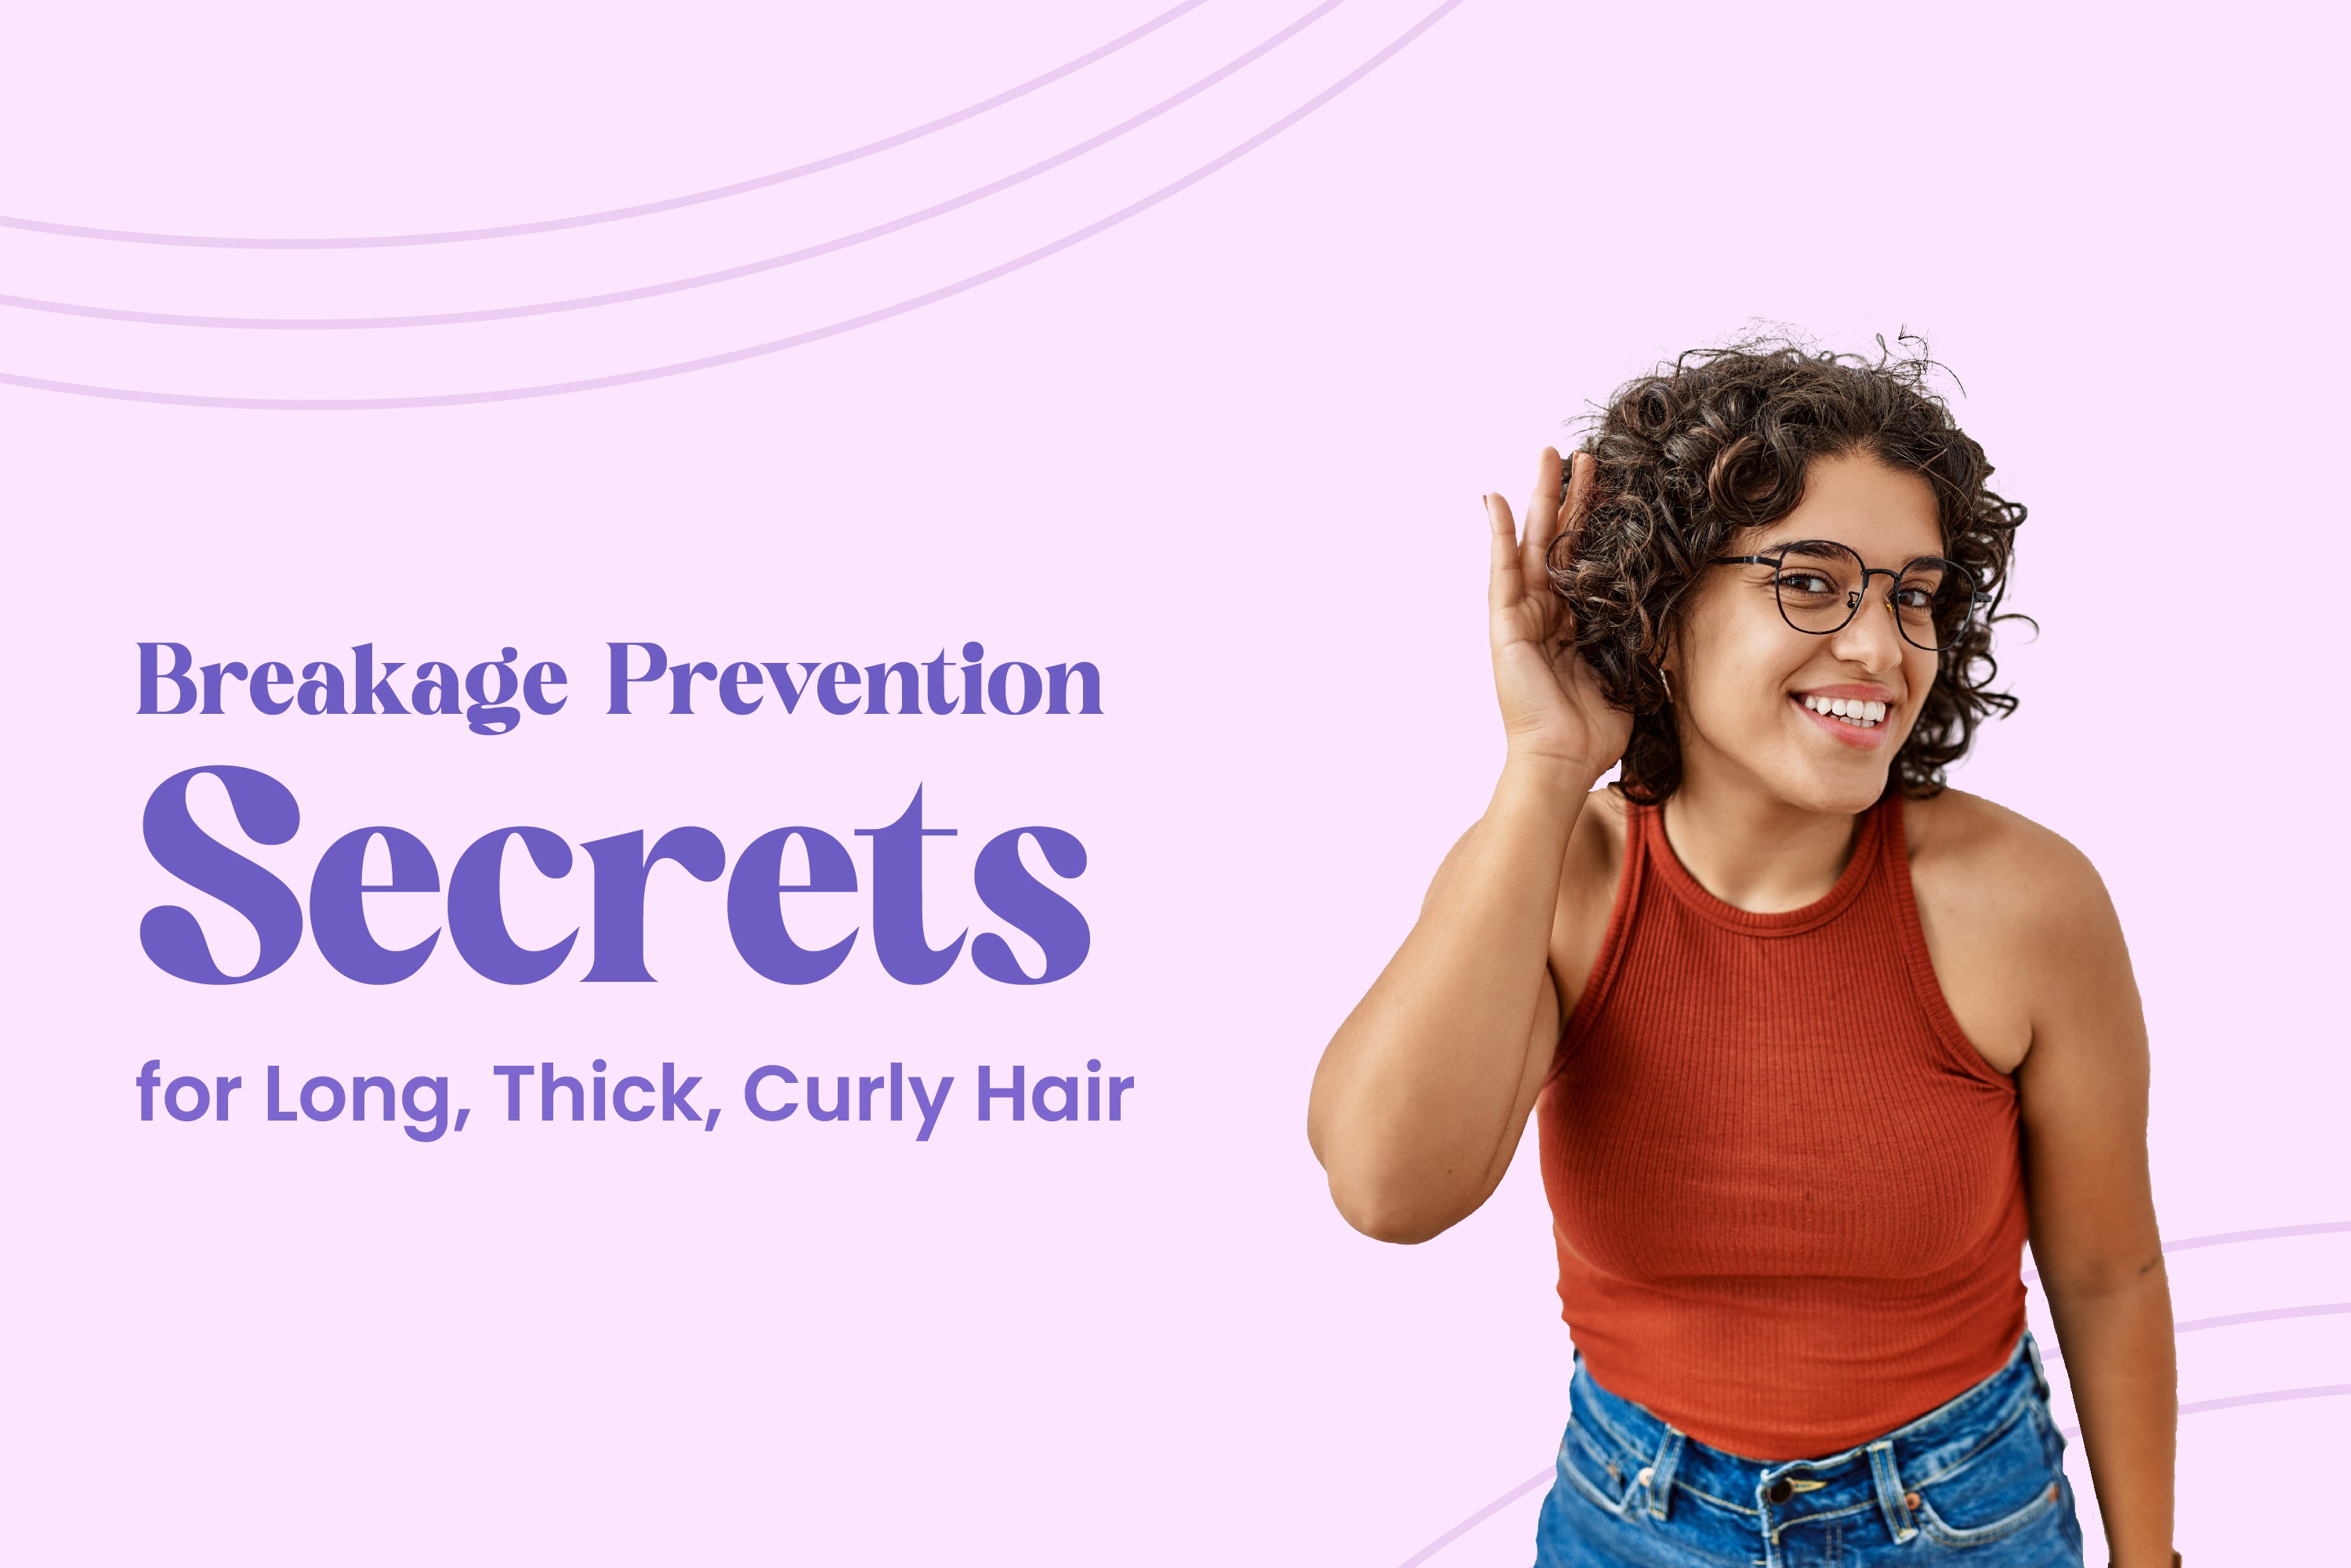 Breakage Prevention Secrets for Long, Thick, Curly Hair